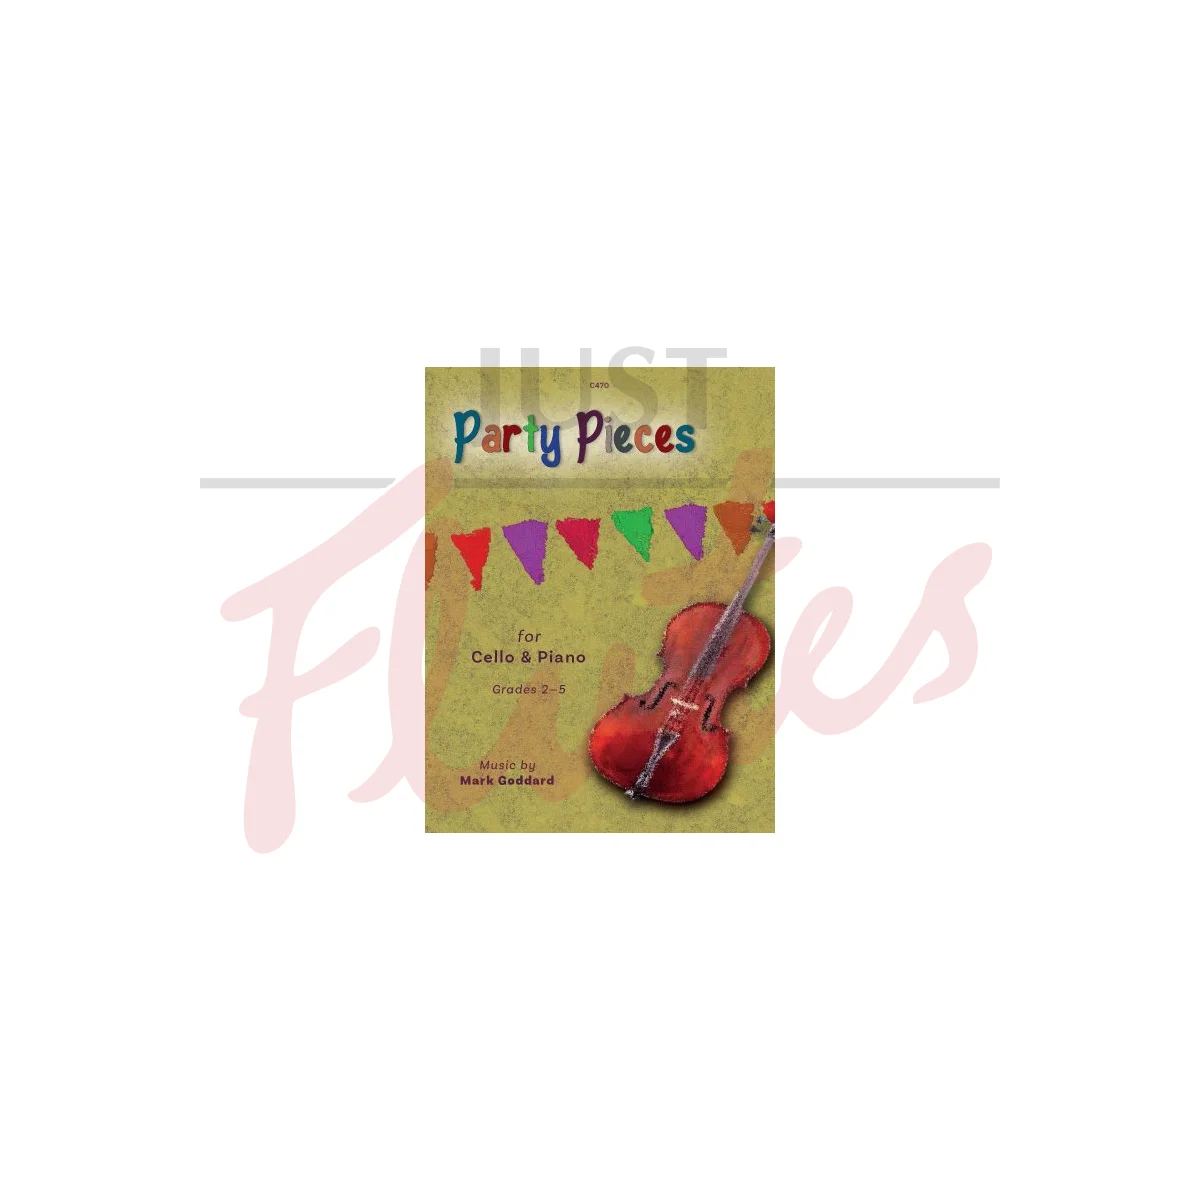 Party Pieces for Cello and Piano